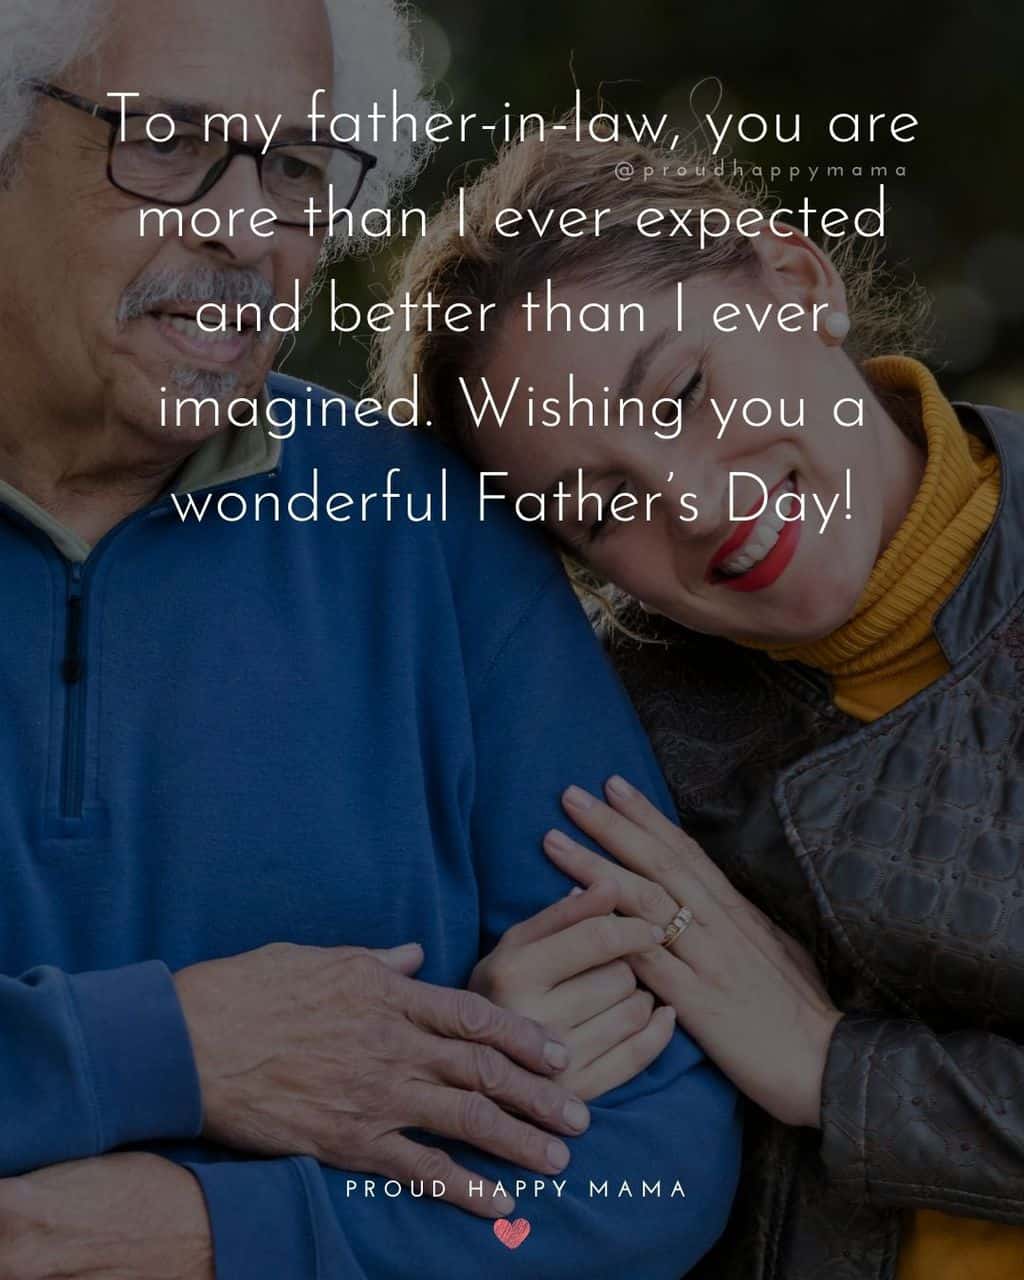 Happy Fathers Day Quotes For Father In Law - To my father in law, you are more than I ever expected and better than I ever